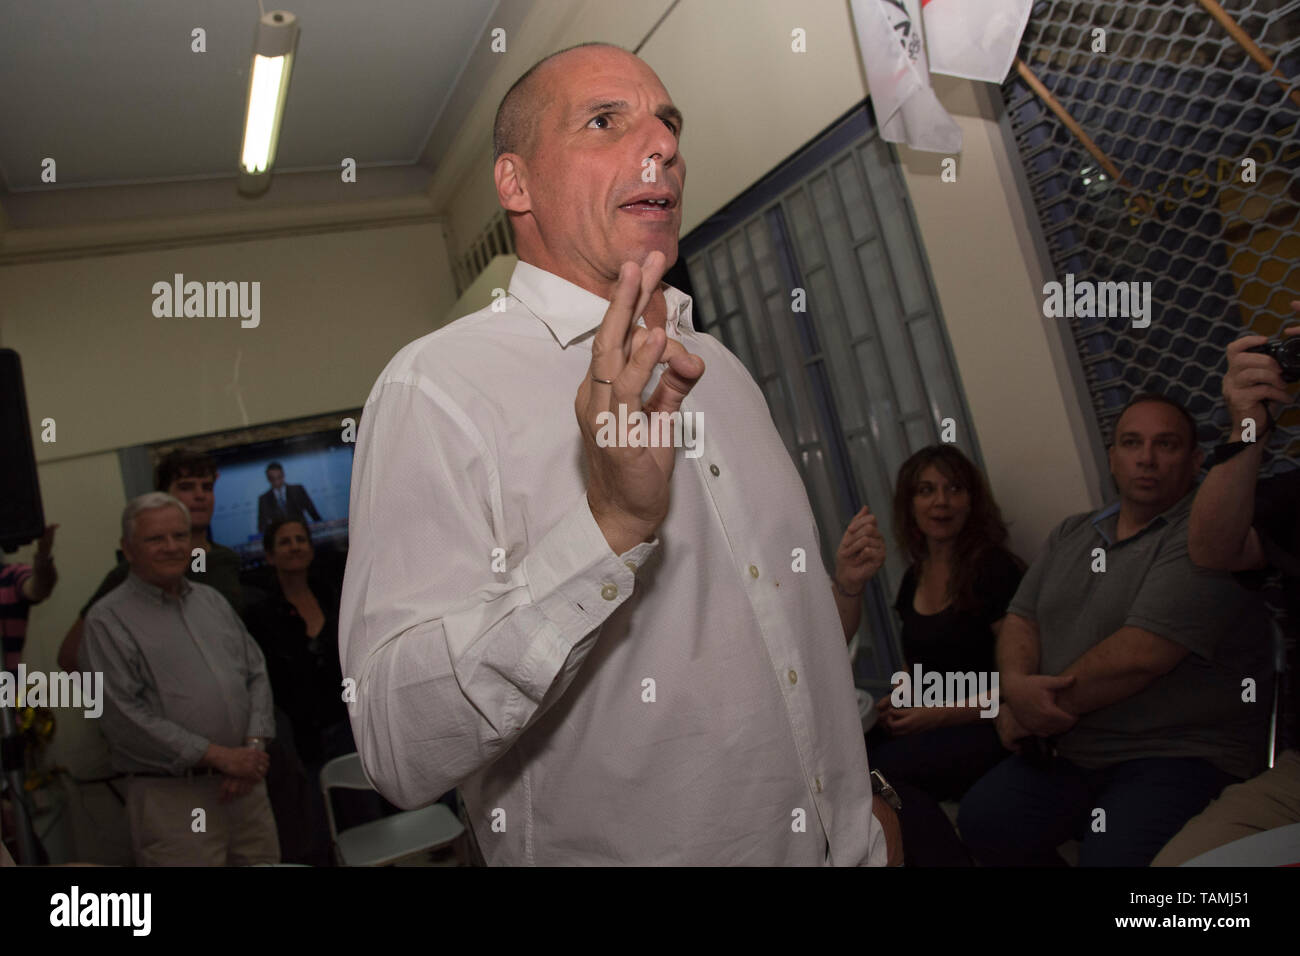 Athens, Greece. 26th May 2019. YIANIS VAROUFAKIS, former Greek Minister of Finance, co-founder of the Democracy in Europe Movement 2025 (DiEM25), secretary of it’s greek branch MERA25 and MEP candidate watches the election results after MERA25 won 3.1% on the European parliamentary elections. Greece heads for national elections as the governing party SYRIZA suffered a major defeat.© Nikolas Georgiou / Alamy Live News Stock Photo